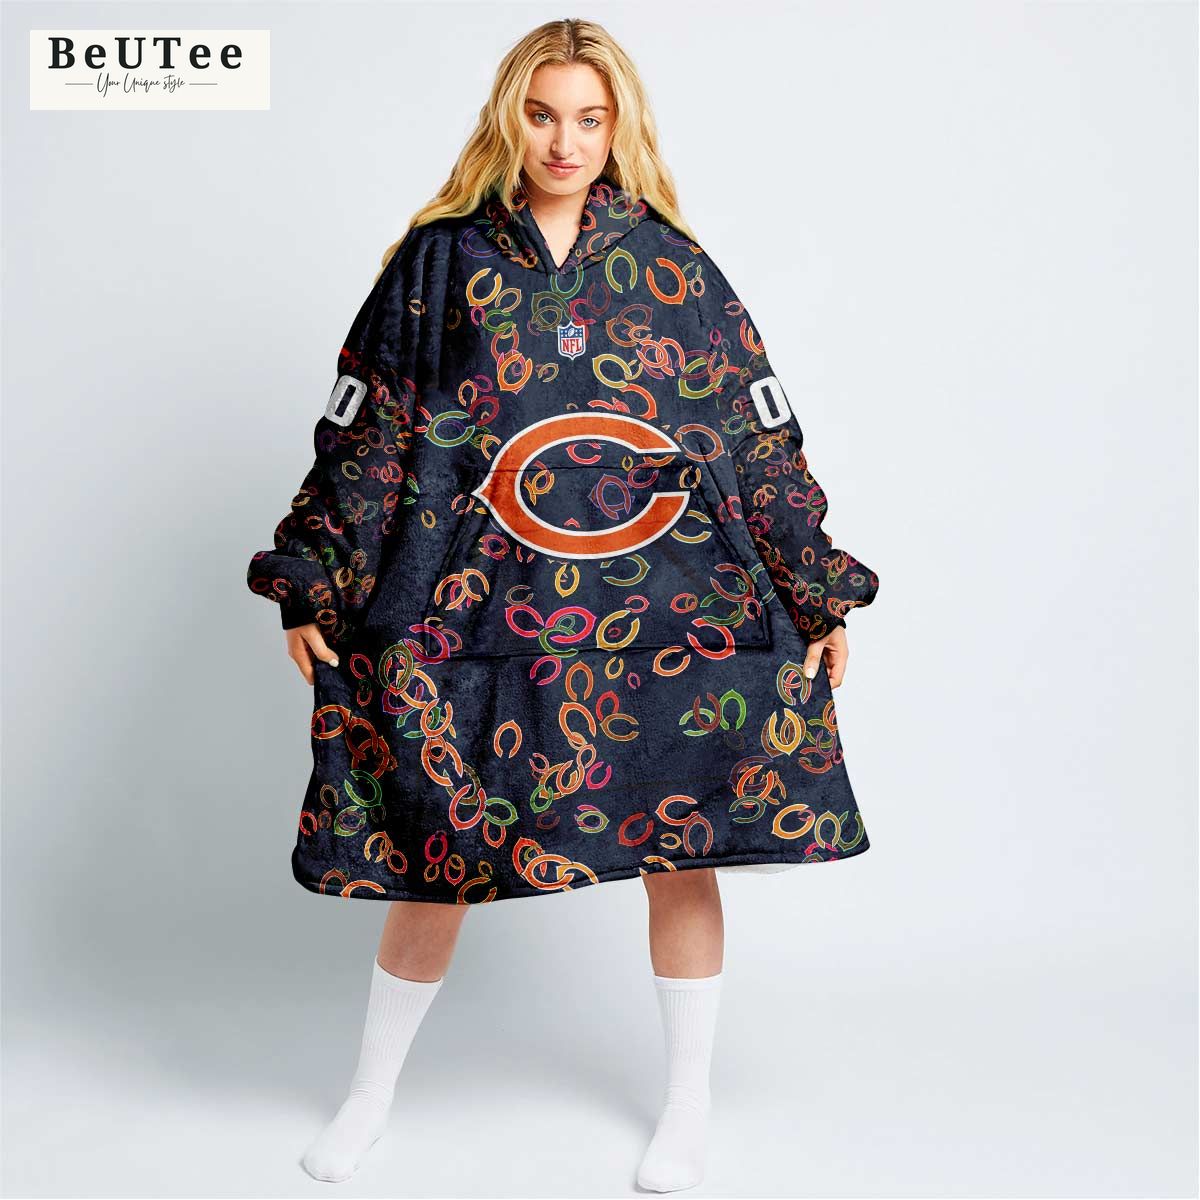 chicago bears nfl champion personalized snuggie hoodie 1 O5Tzf